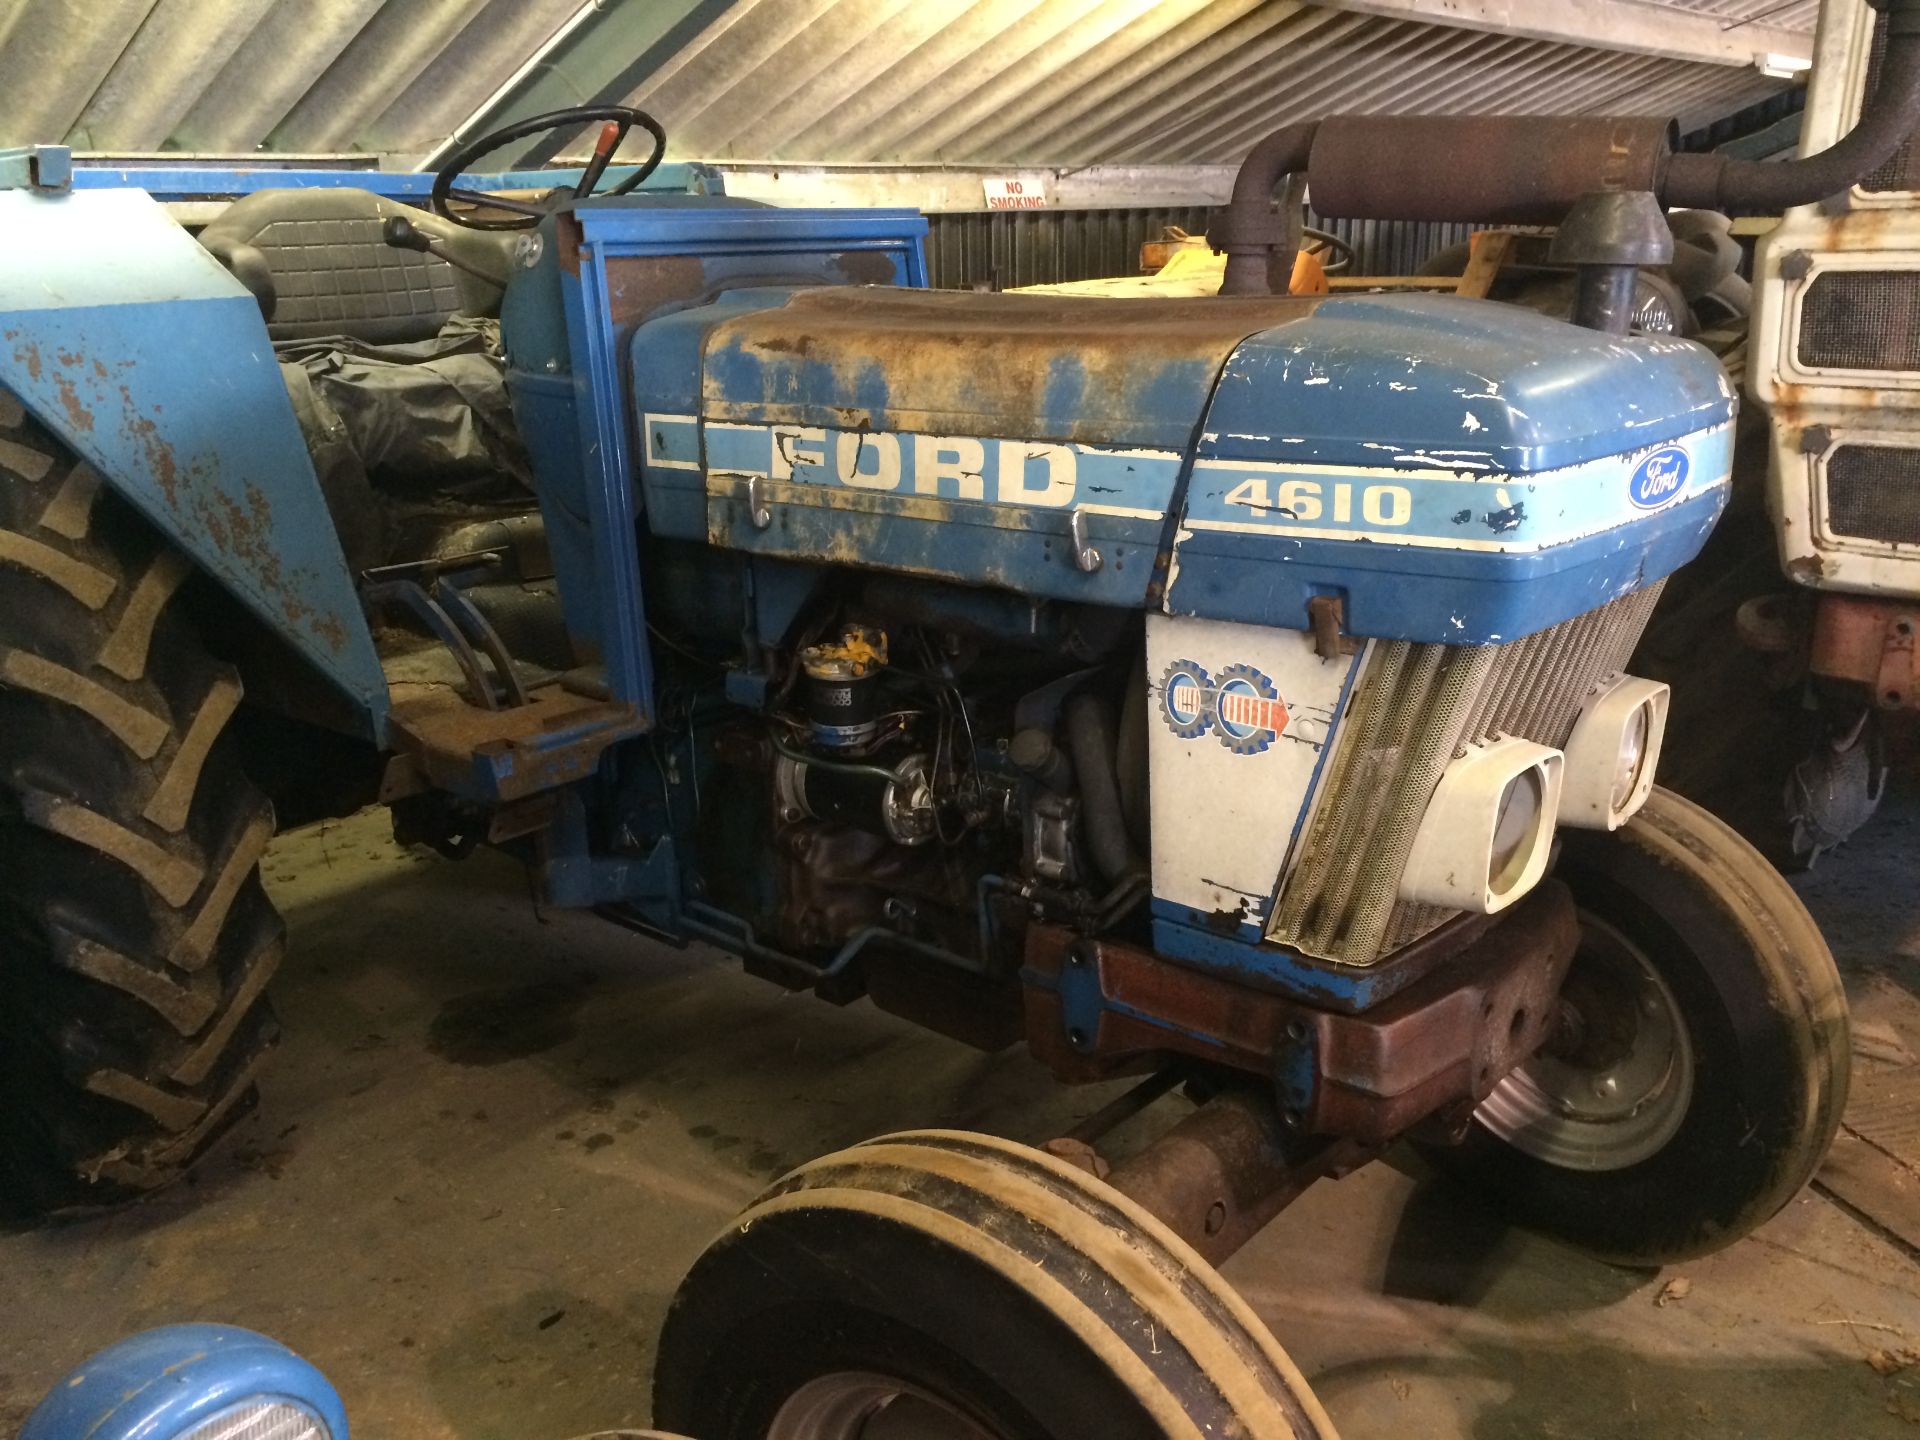 FORD 4610 diesel TRACTOR Cab removed and in ex-farm condition.